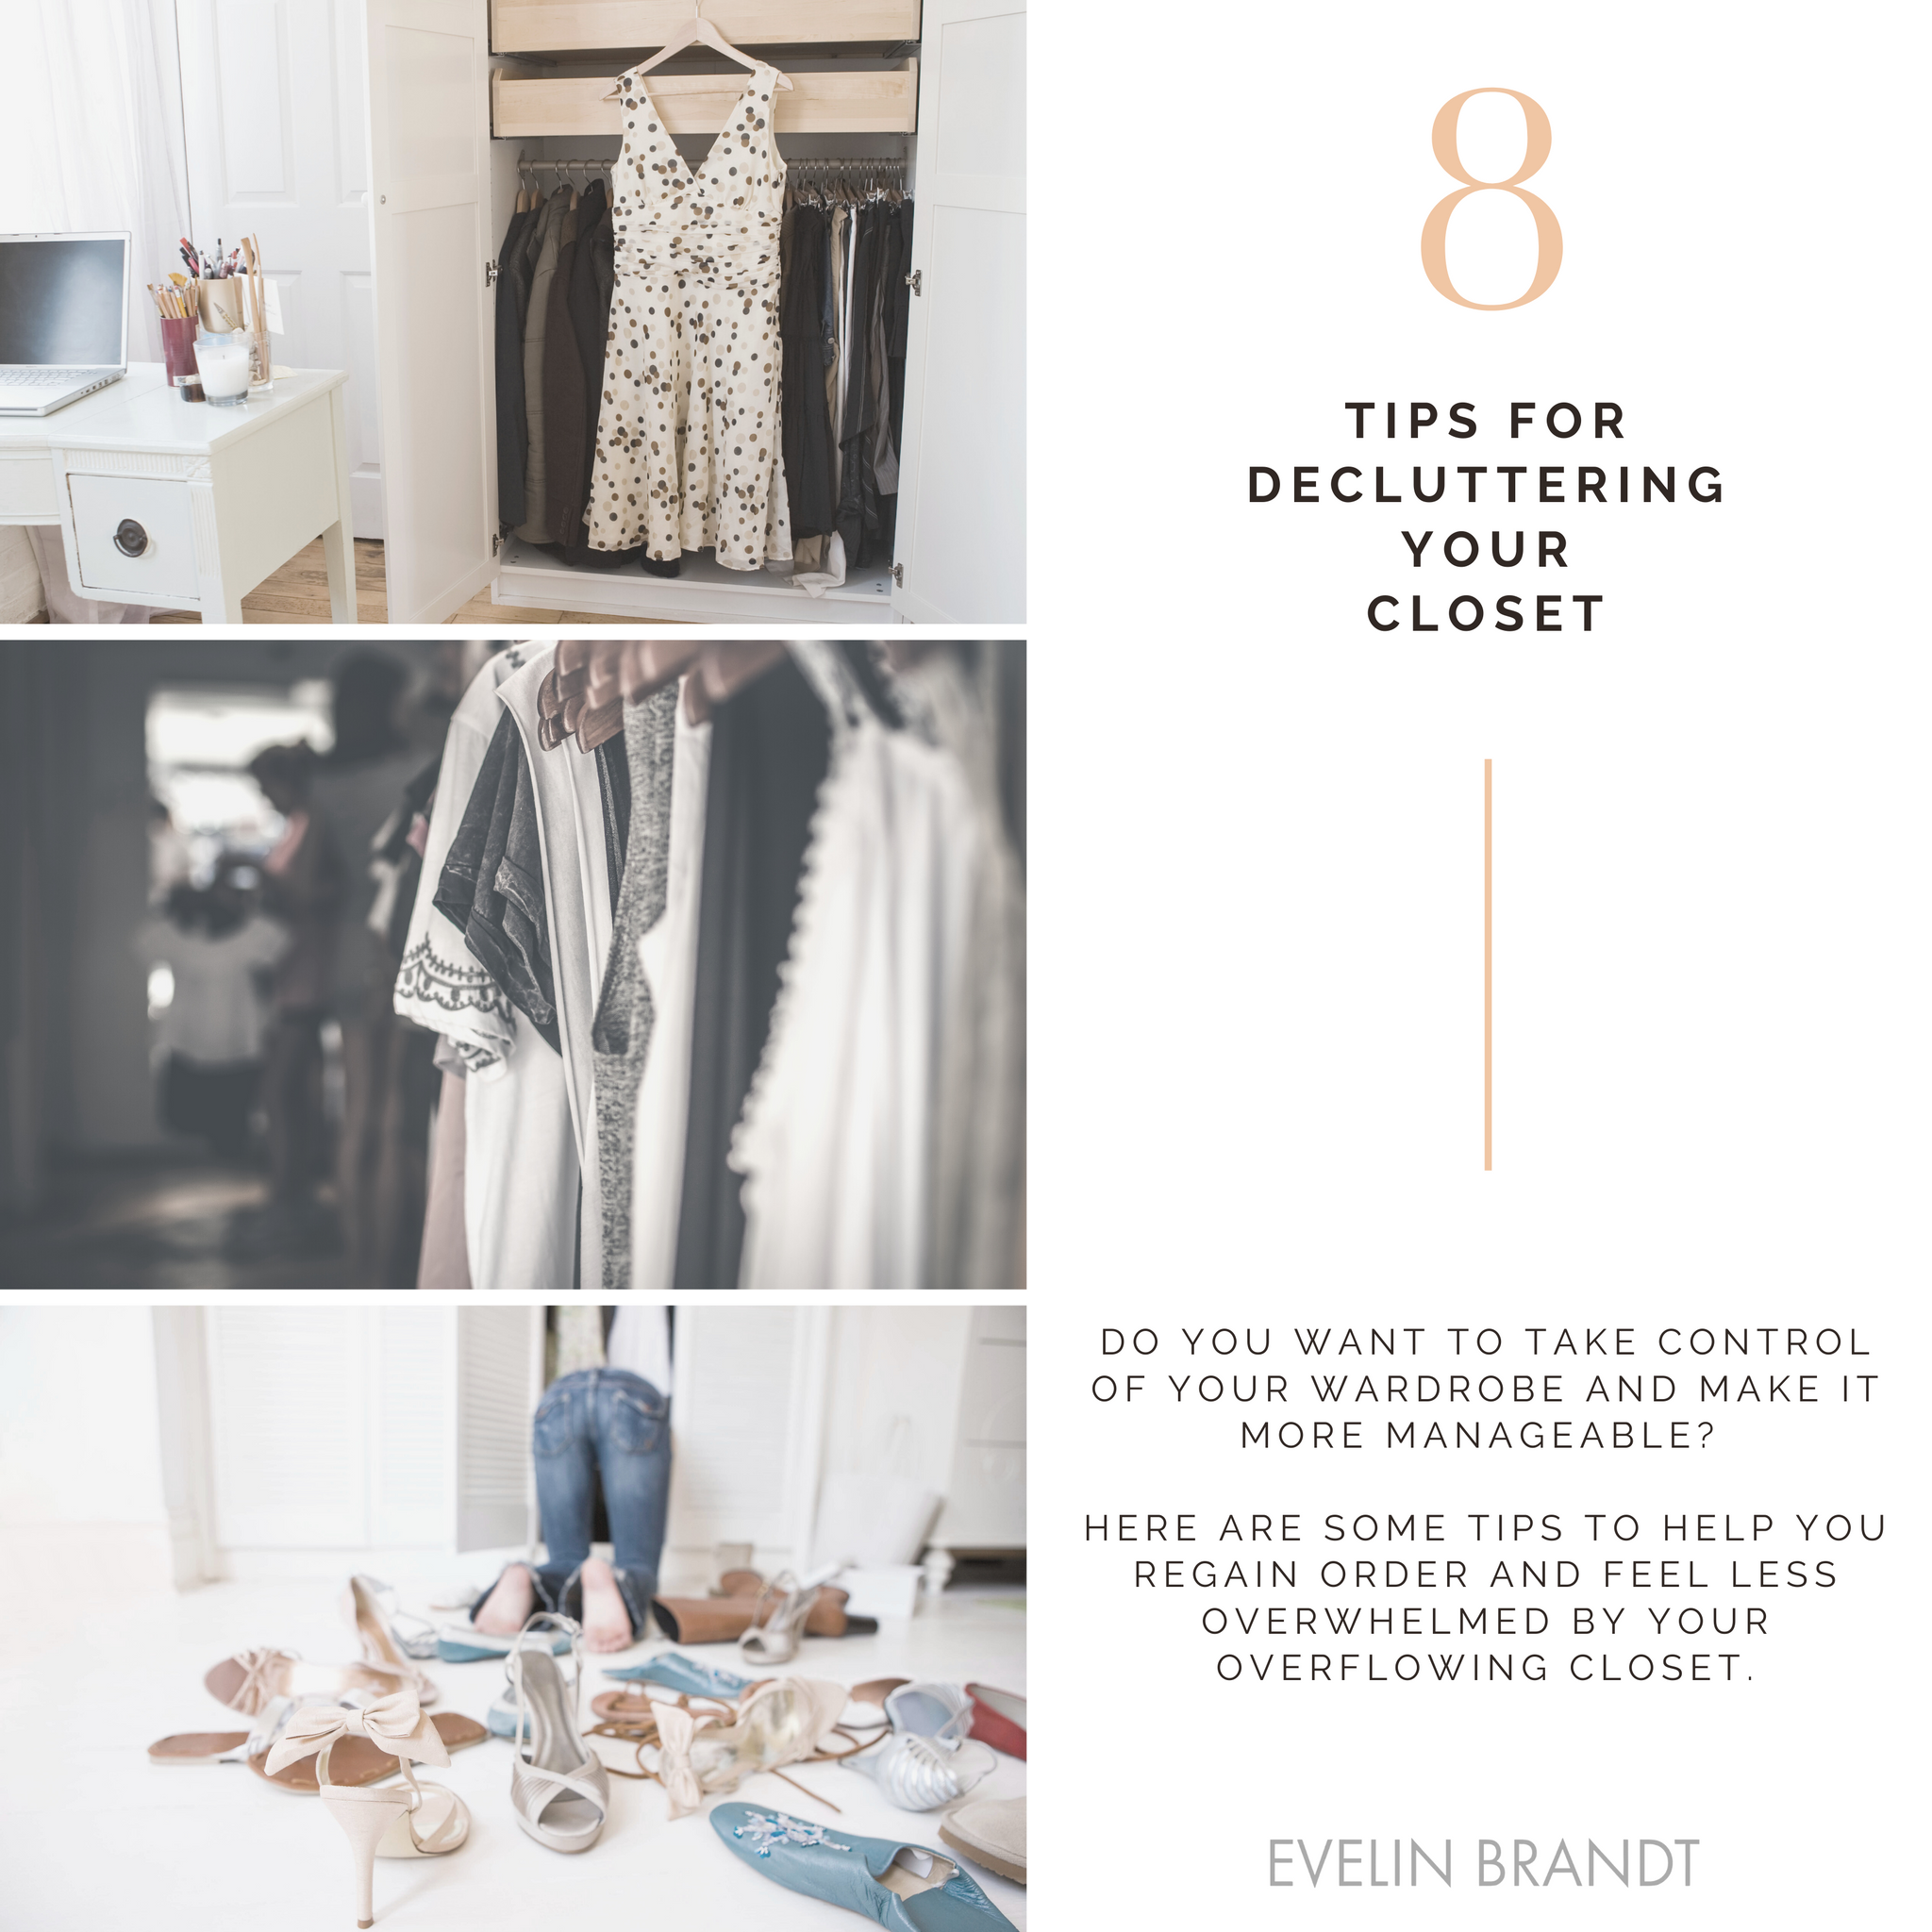 Declutter your closet in a few simple steps✨